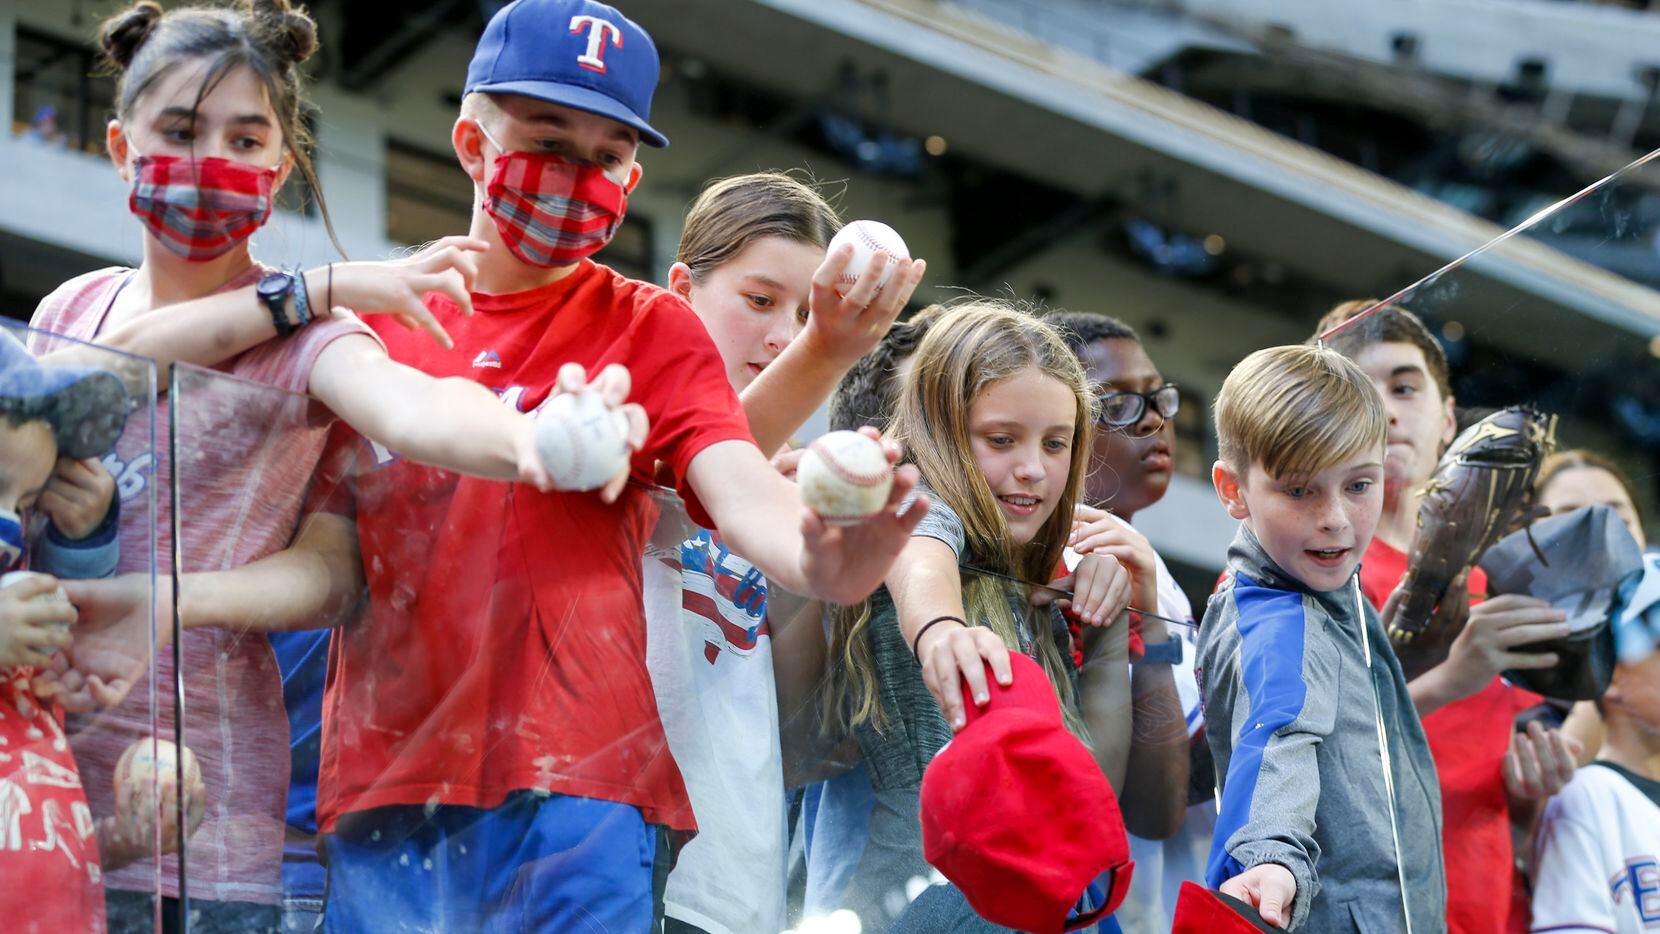 A group of young Texas Rangers fans wait to get autographs from players after the final game...